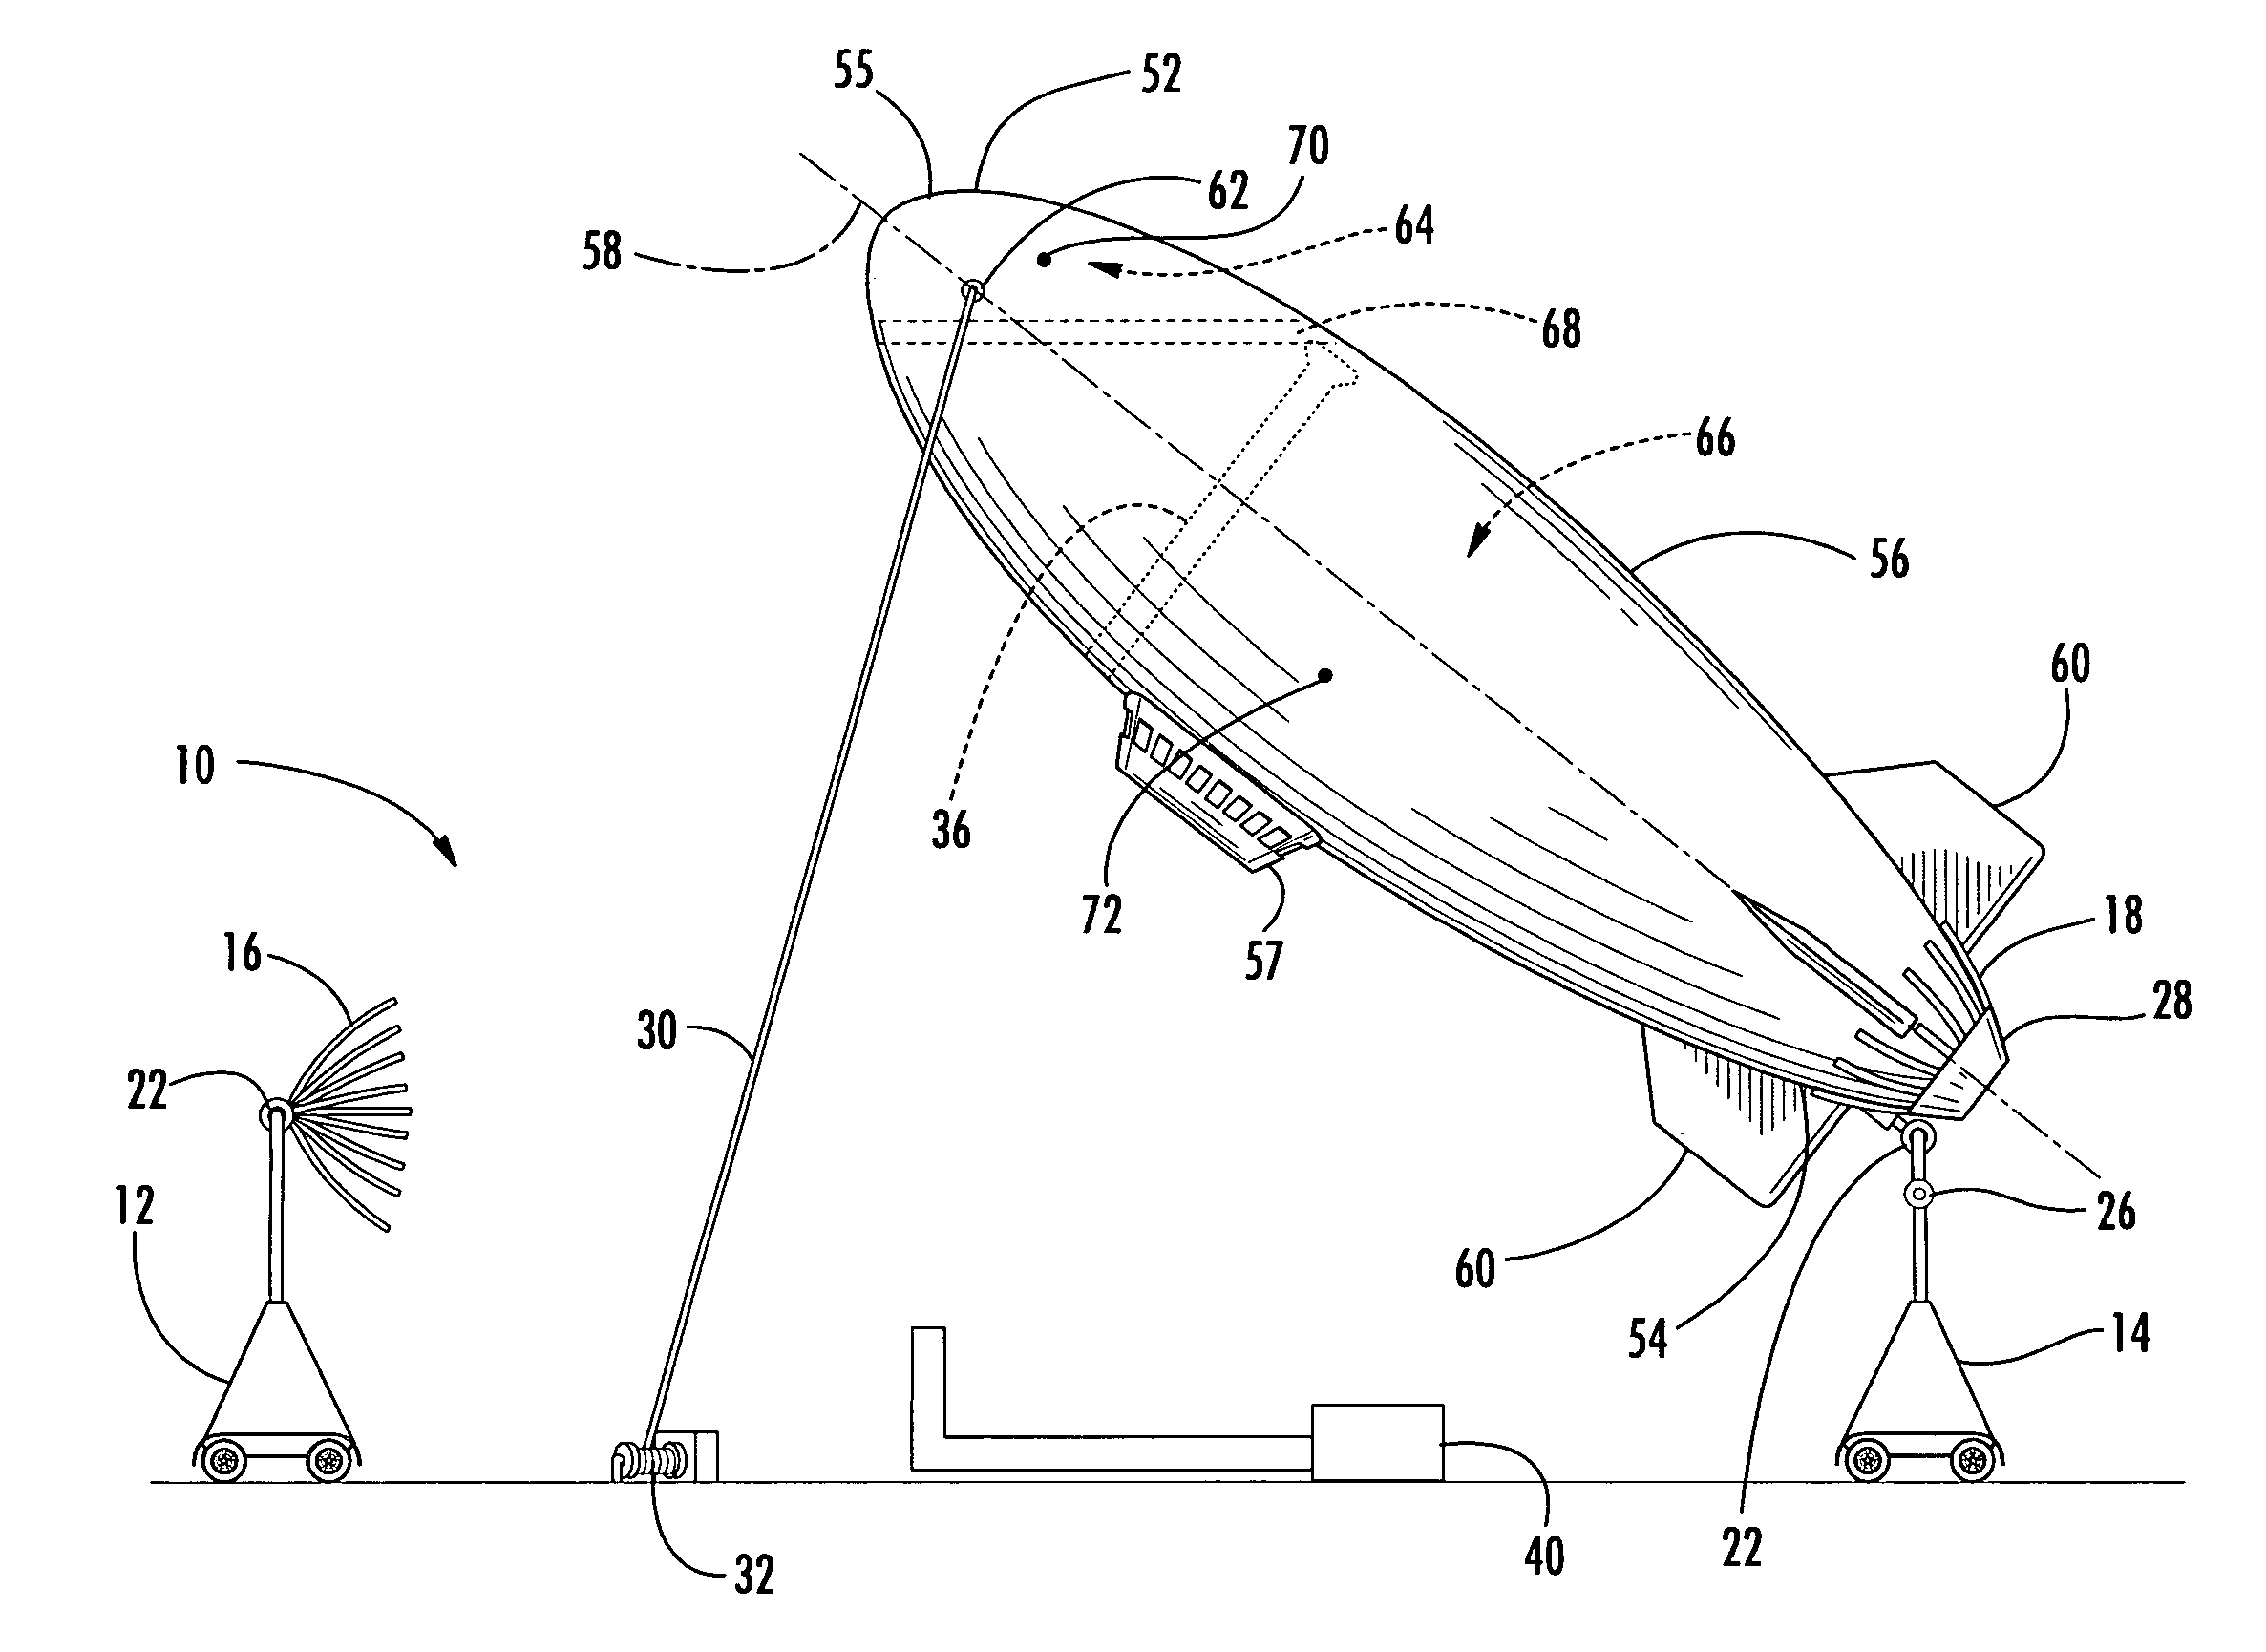 Apparatus and method for lighter-than-air aircraft